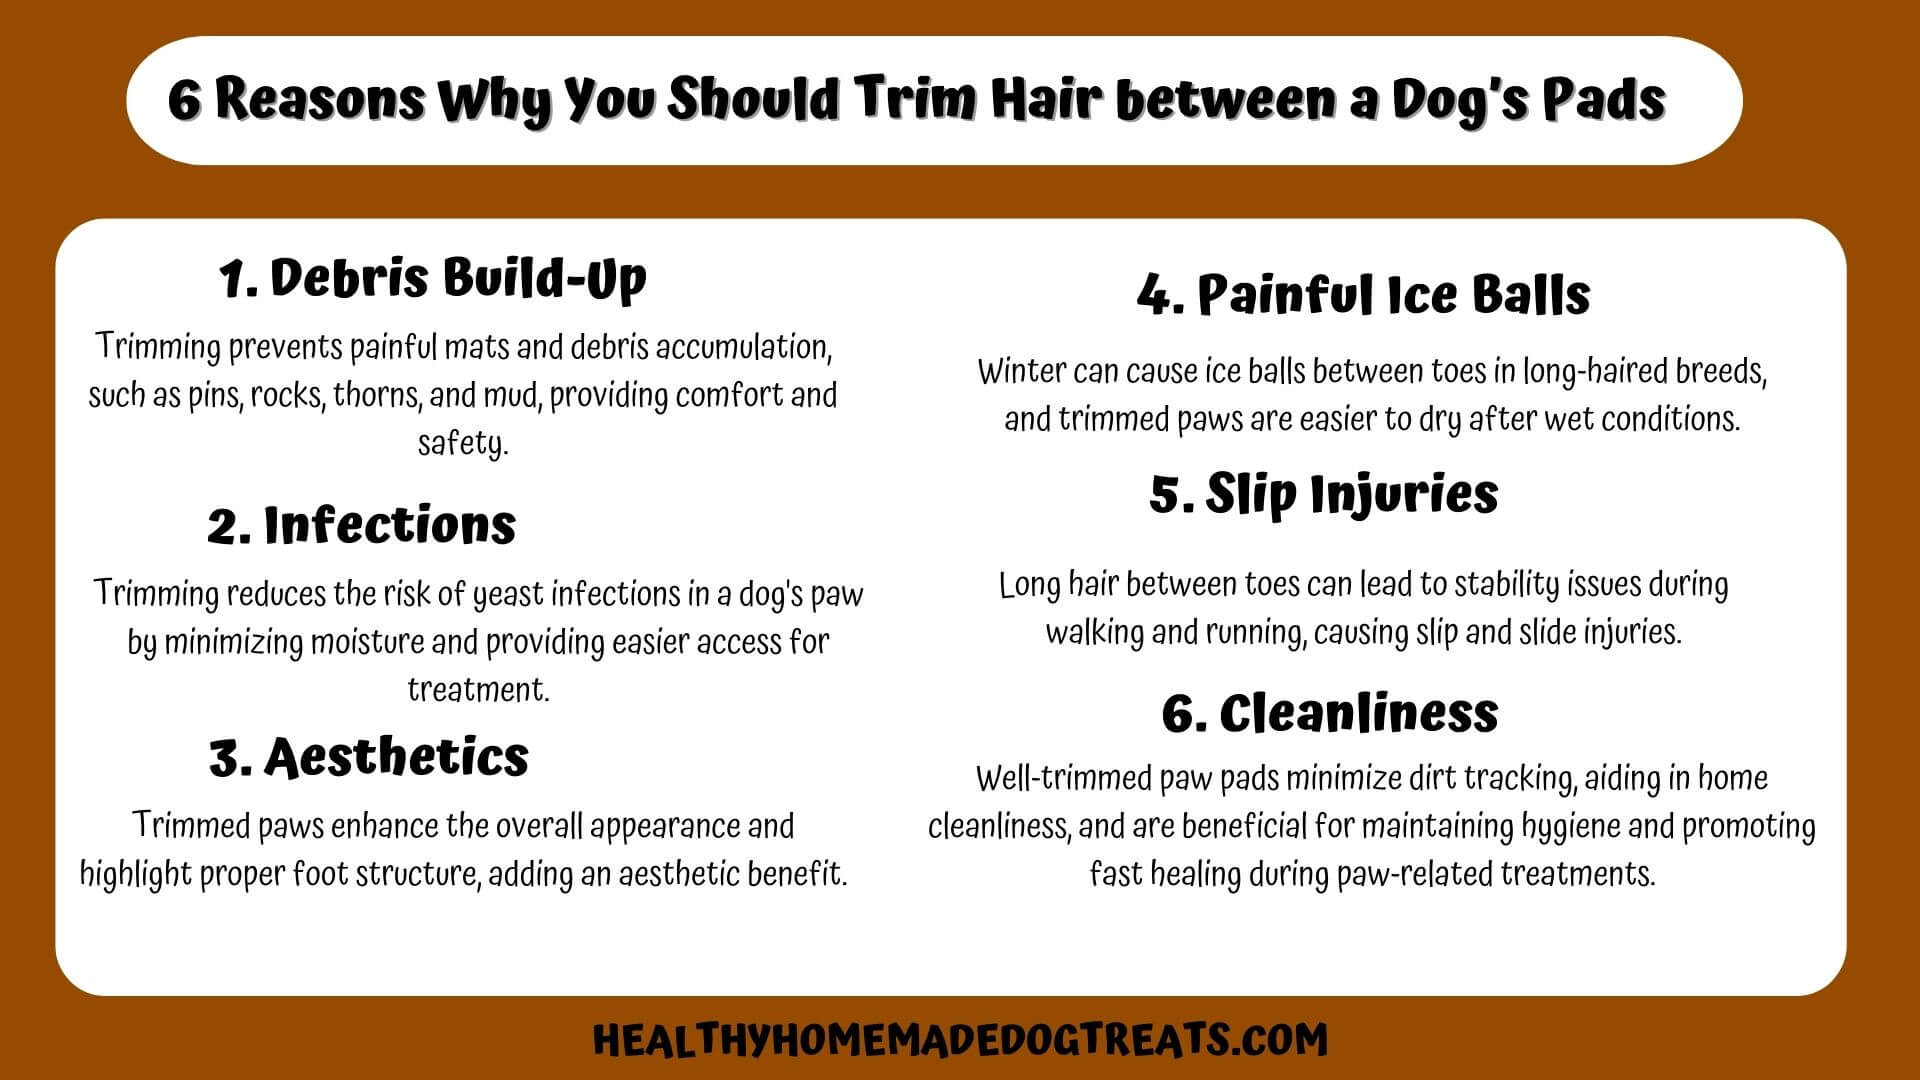 6 Reasons Why You Should Trim Hair between a Dog’s Pads